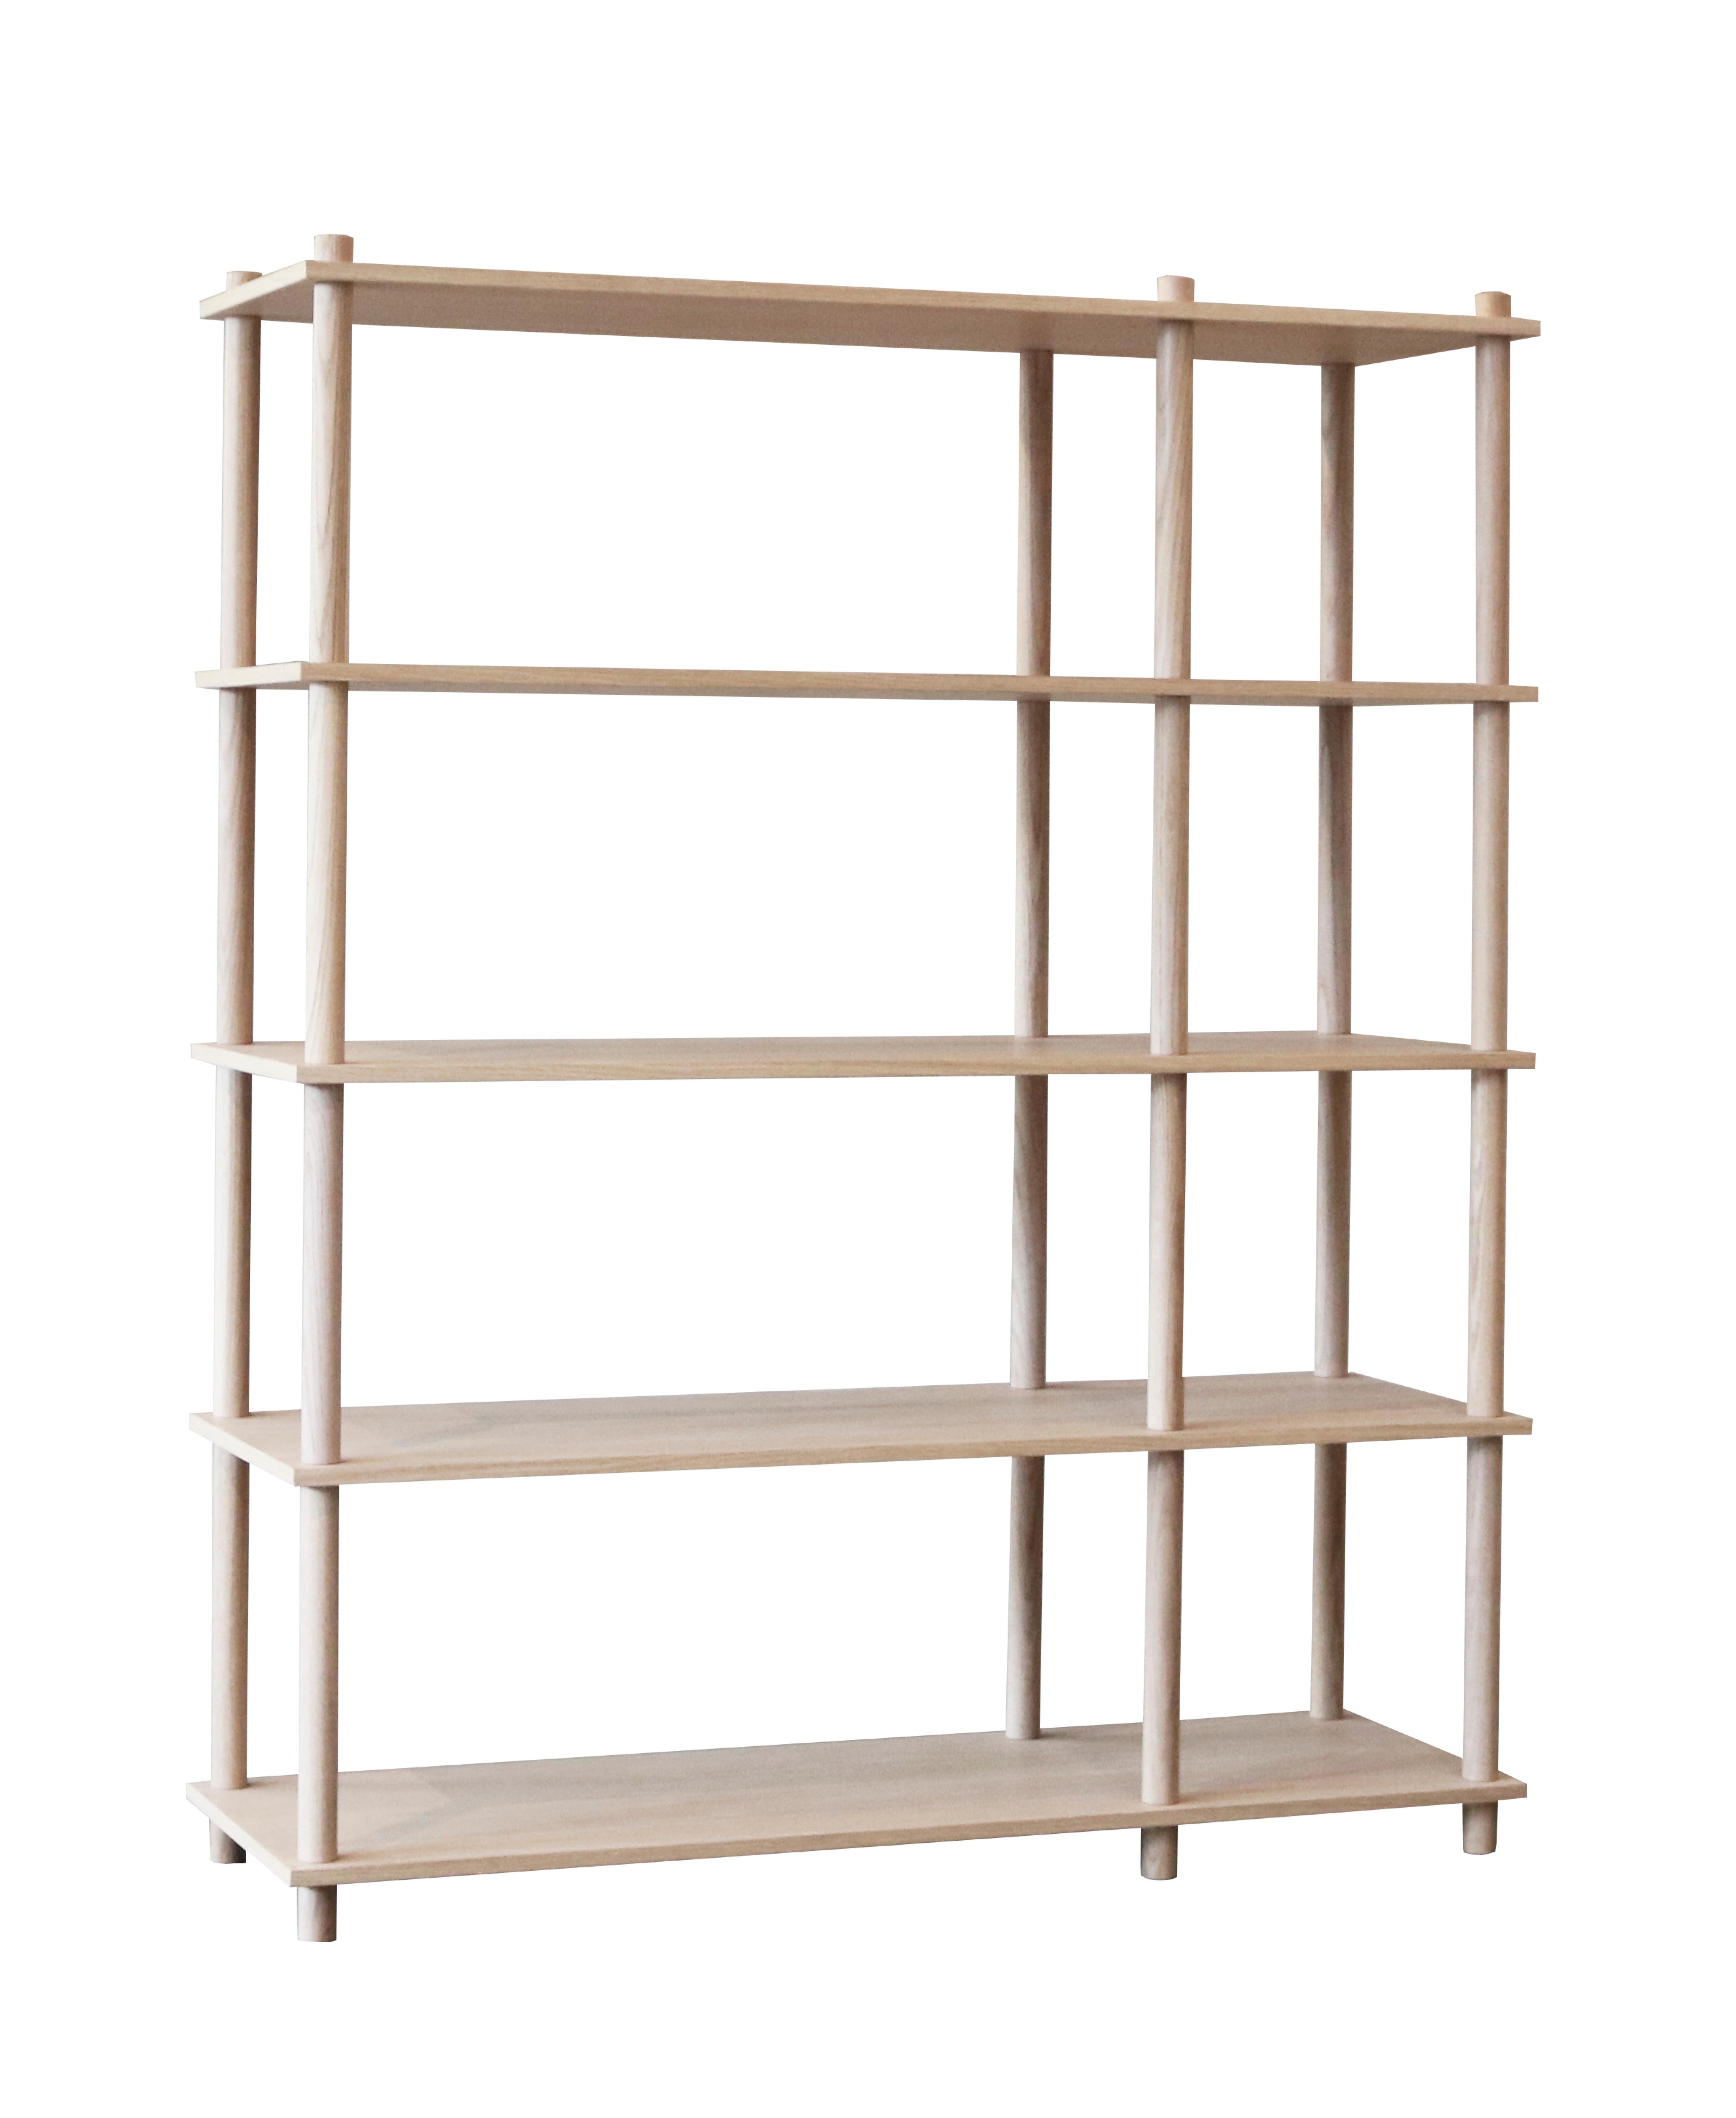 Oak elevate shelving IX by Camilla Akersveen and Christopher Konings
Materials: Metal, oak.
Dimensions: D 40 x W 120 x H 147.9 cm
Available in matt lacquered oak or black oak. Different shelving systems available.

Camilla Akersveen and